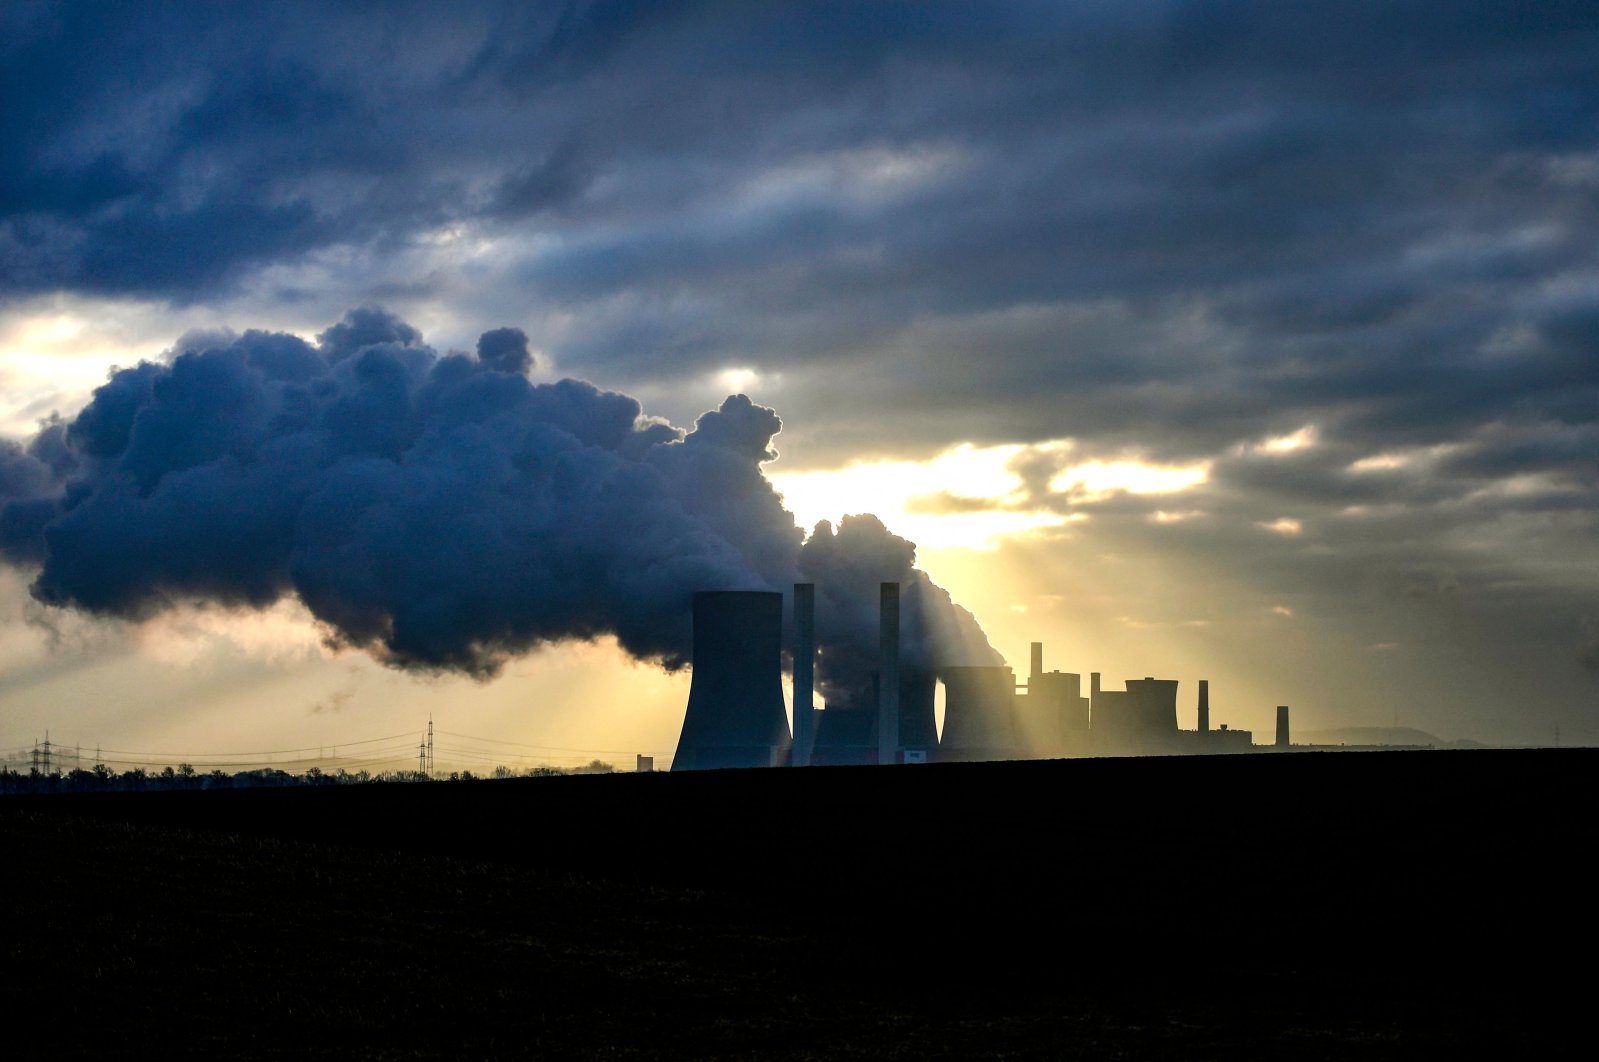 Steam rises from the cooling towers of the lignite-fired power plant of German energy giant RWE in Niederaussem, western Germany, Jan. 17, 2022. (AFP Photo)